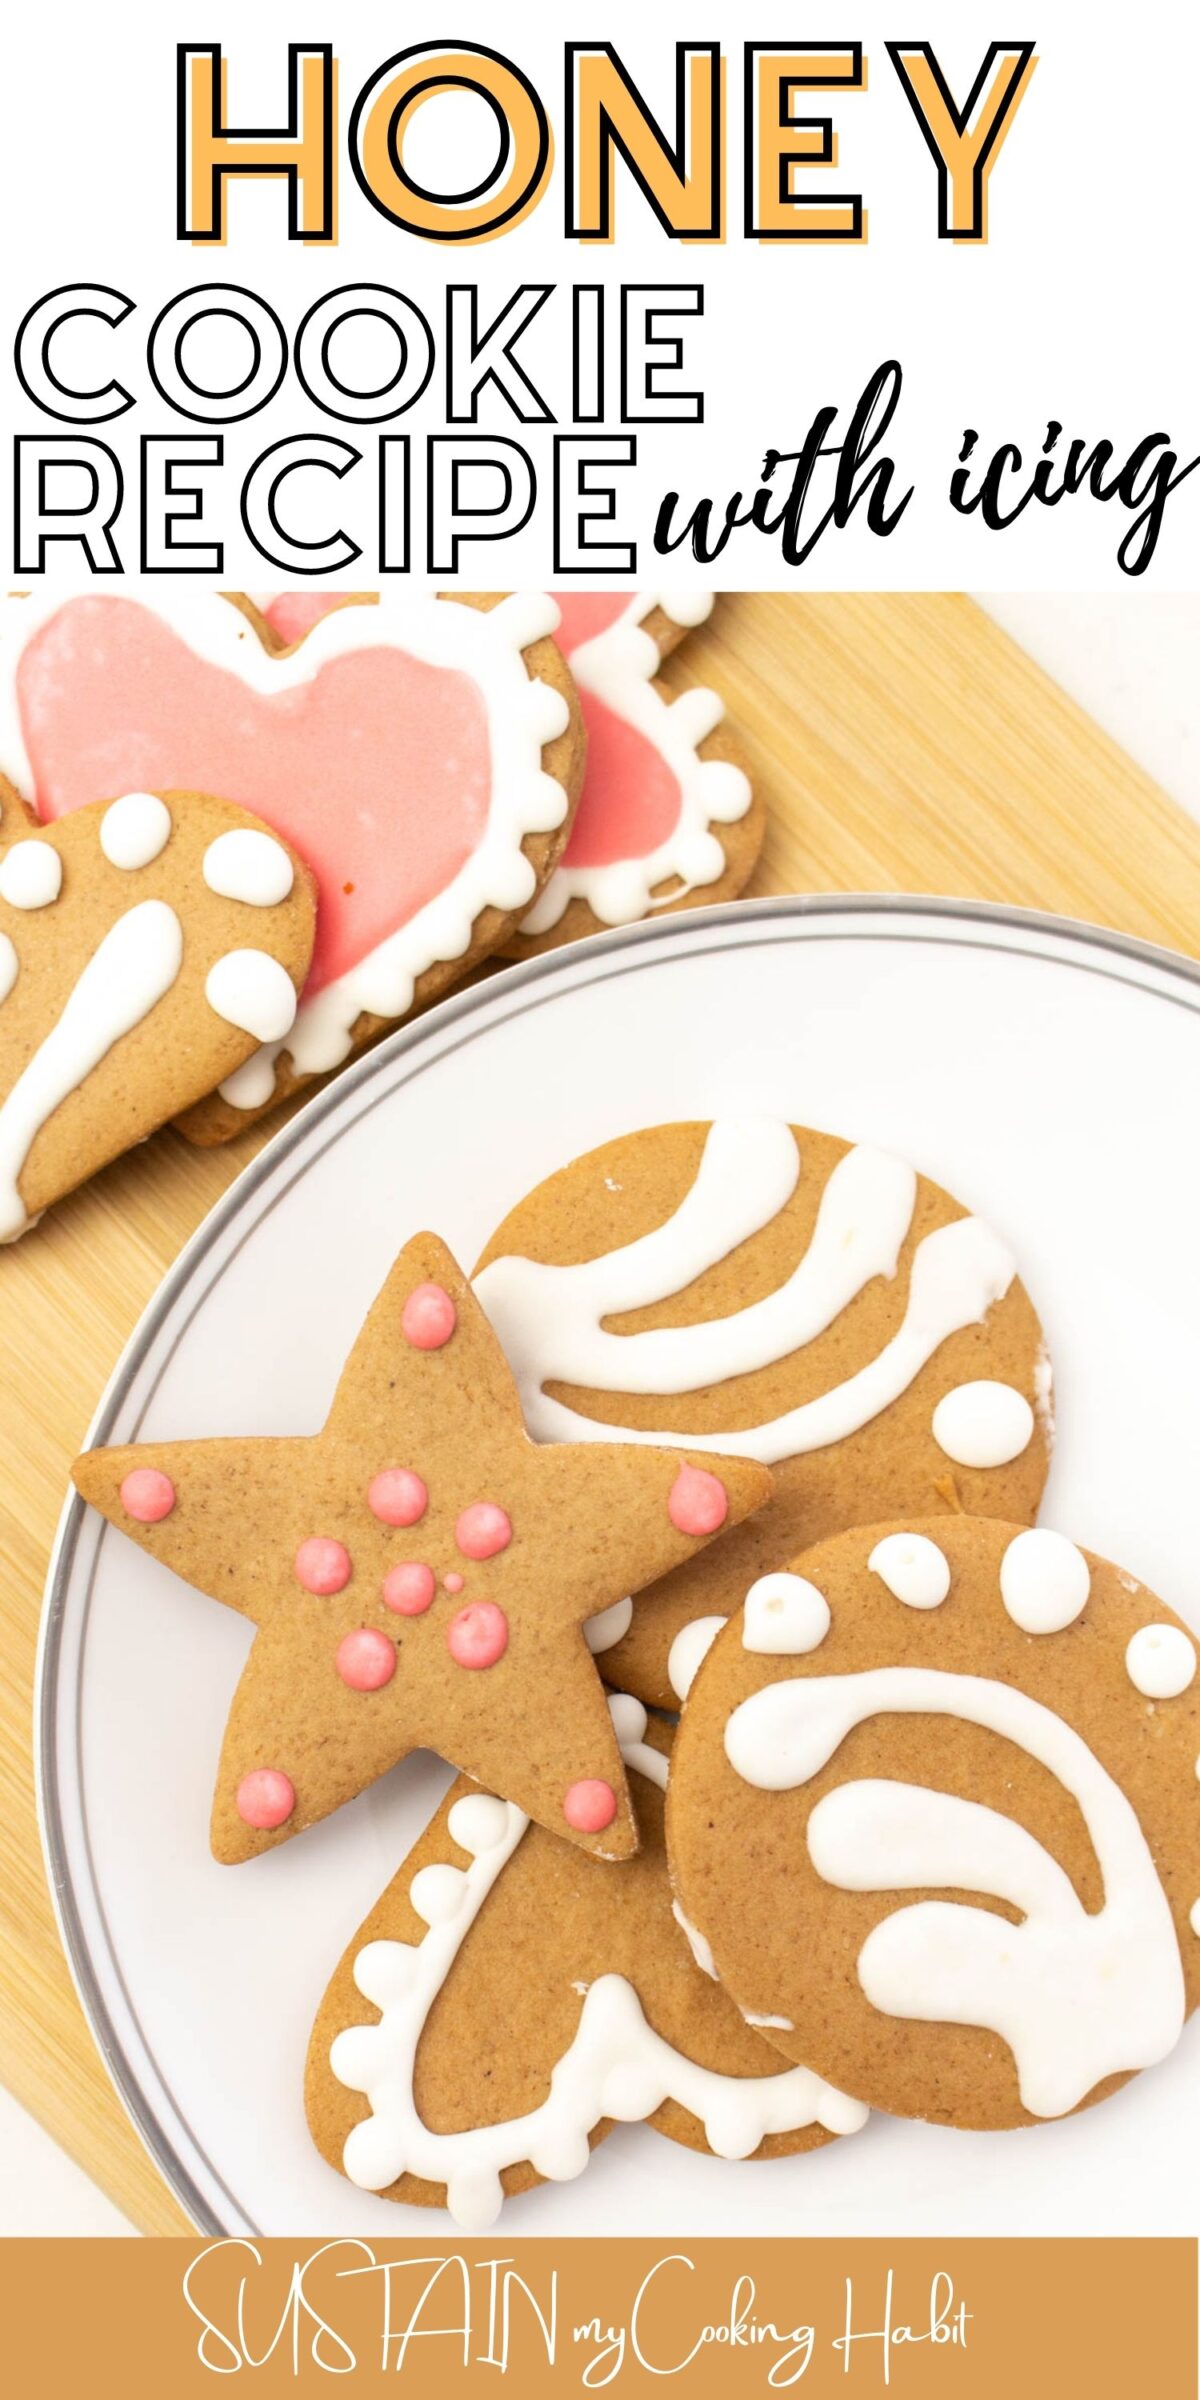 Honey sugar cookies cut into shapes like stars and hearts and placed on a plate.